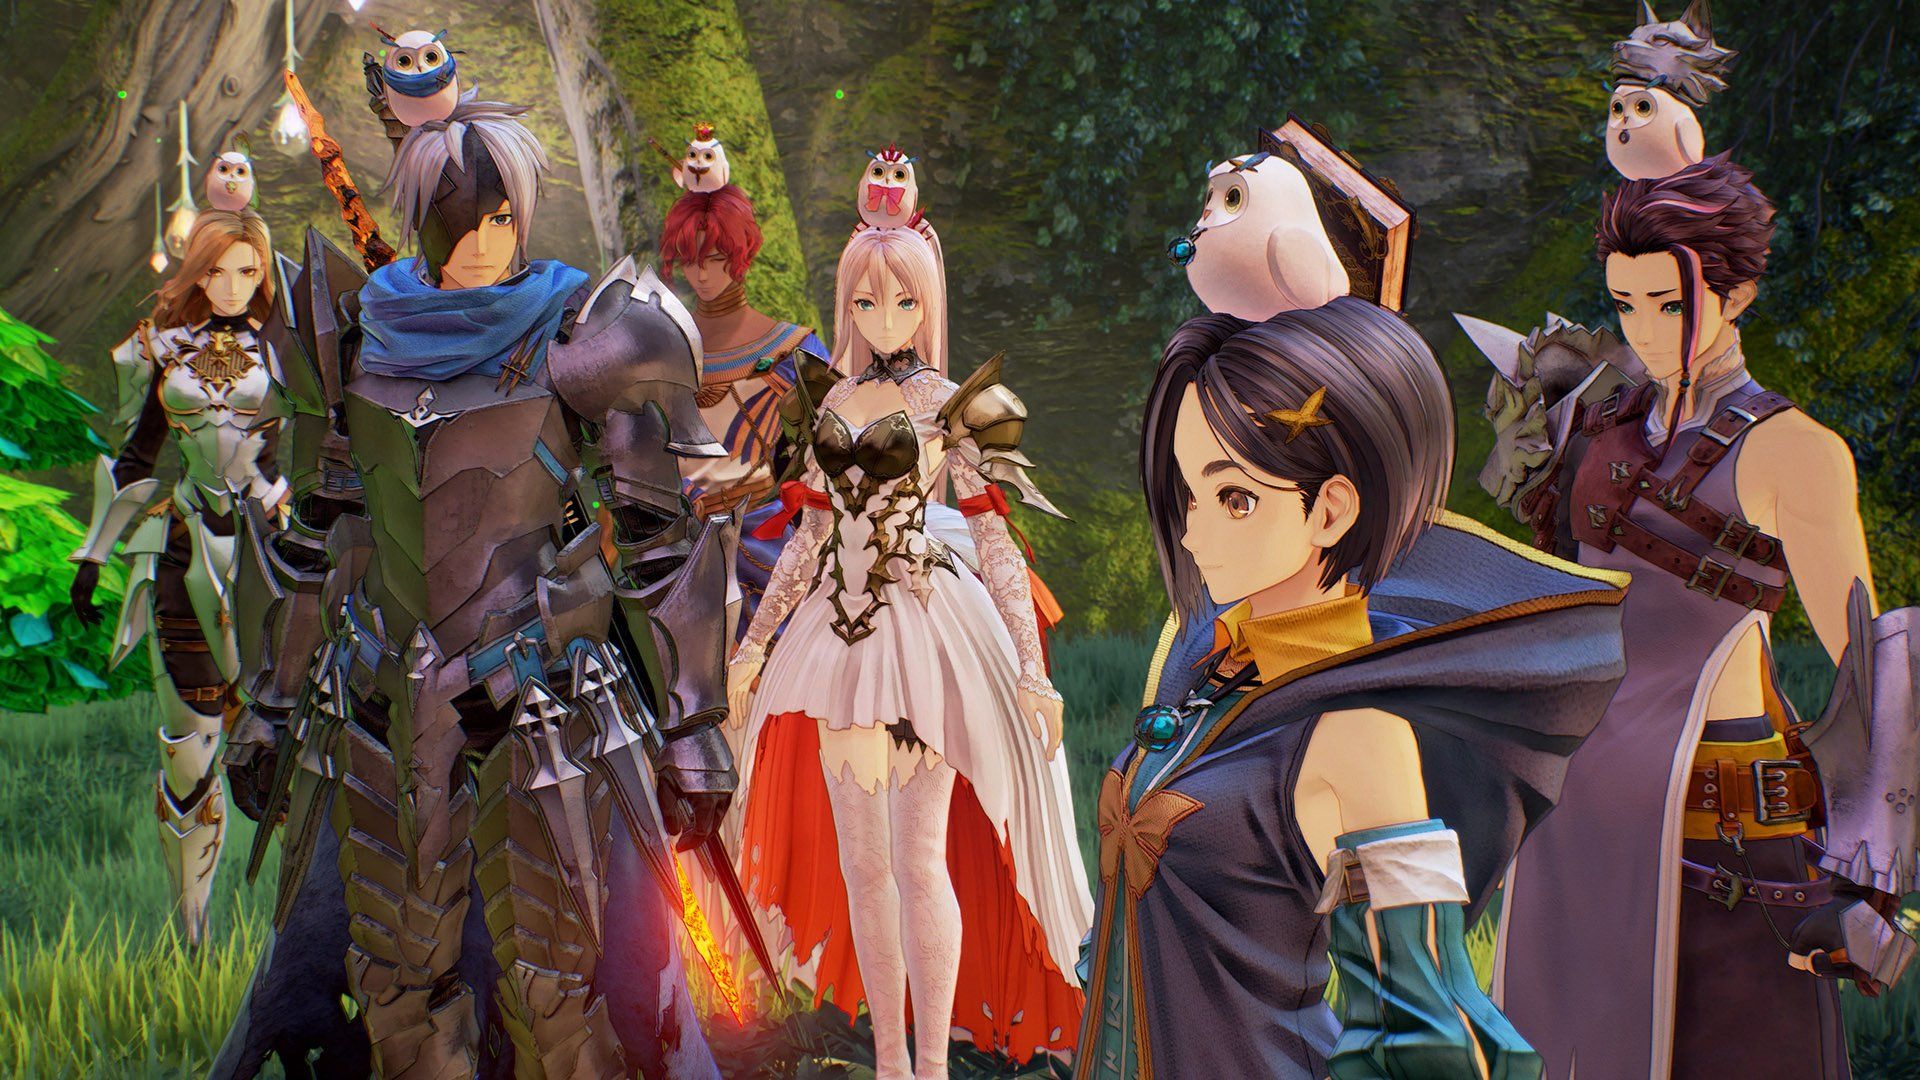 Tales-of-Arise- things the game could improve editorial